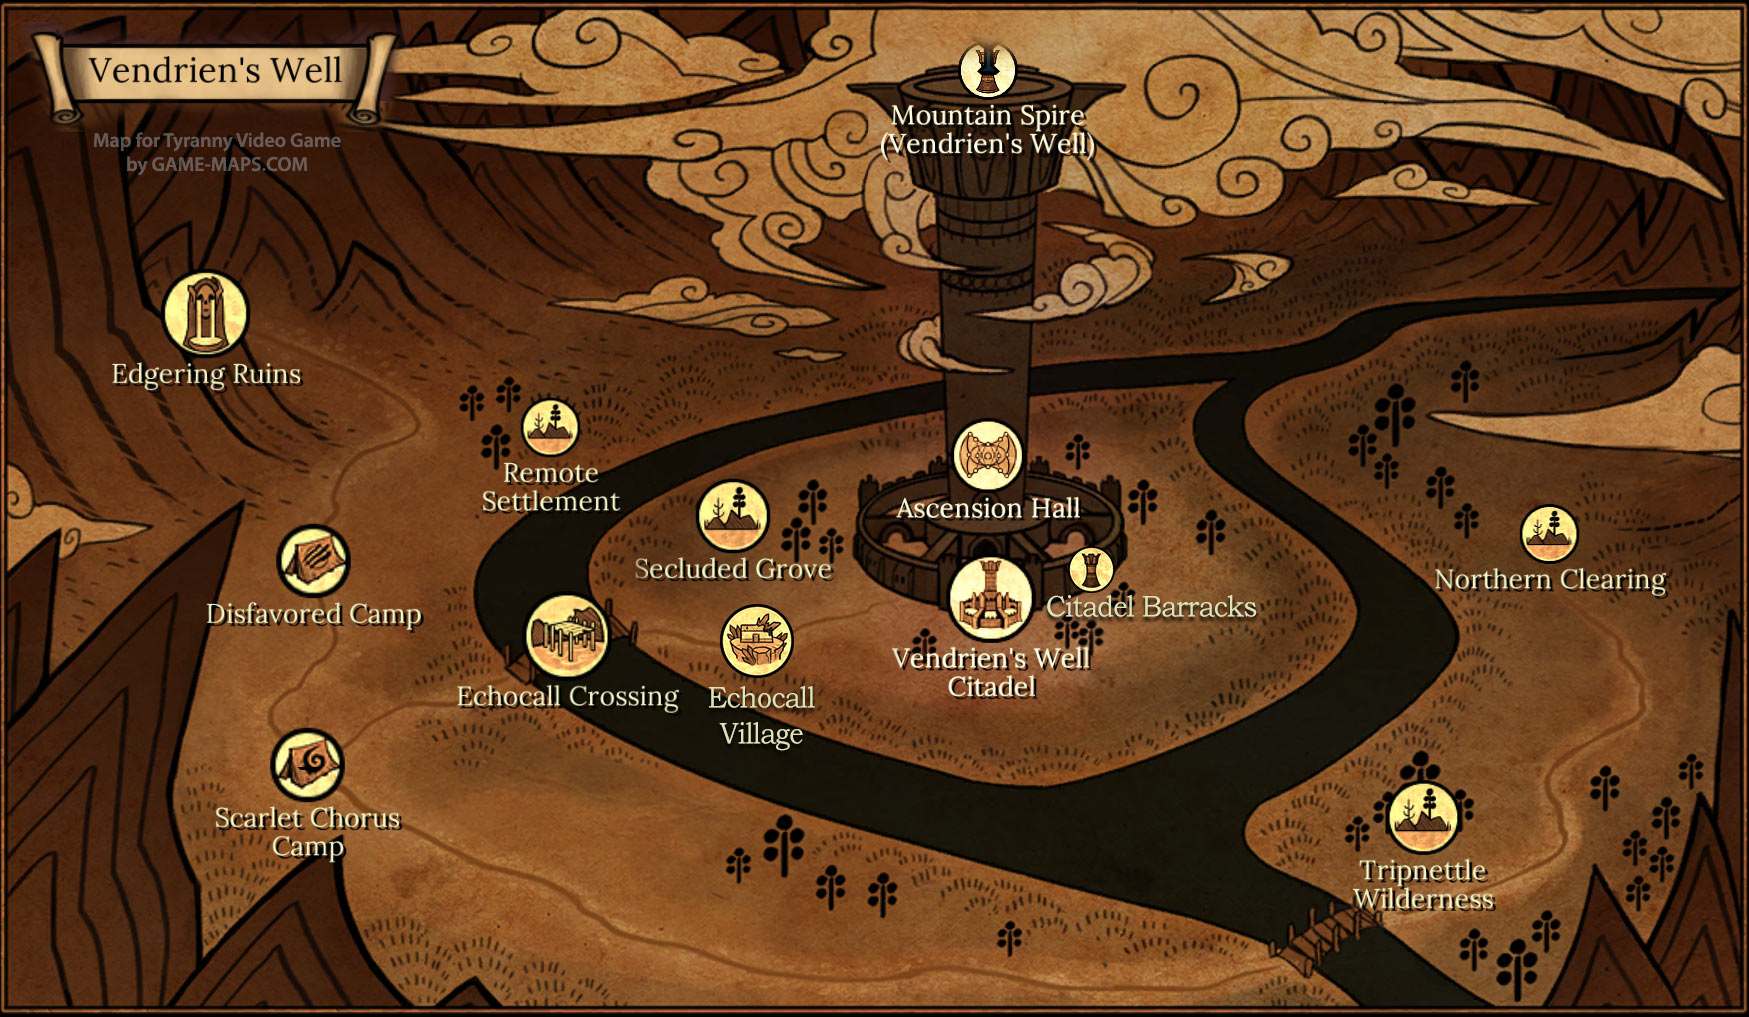 Vendrien's Well Map, Vendrien's Well, Tyranny Video Game